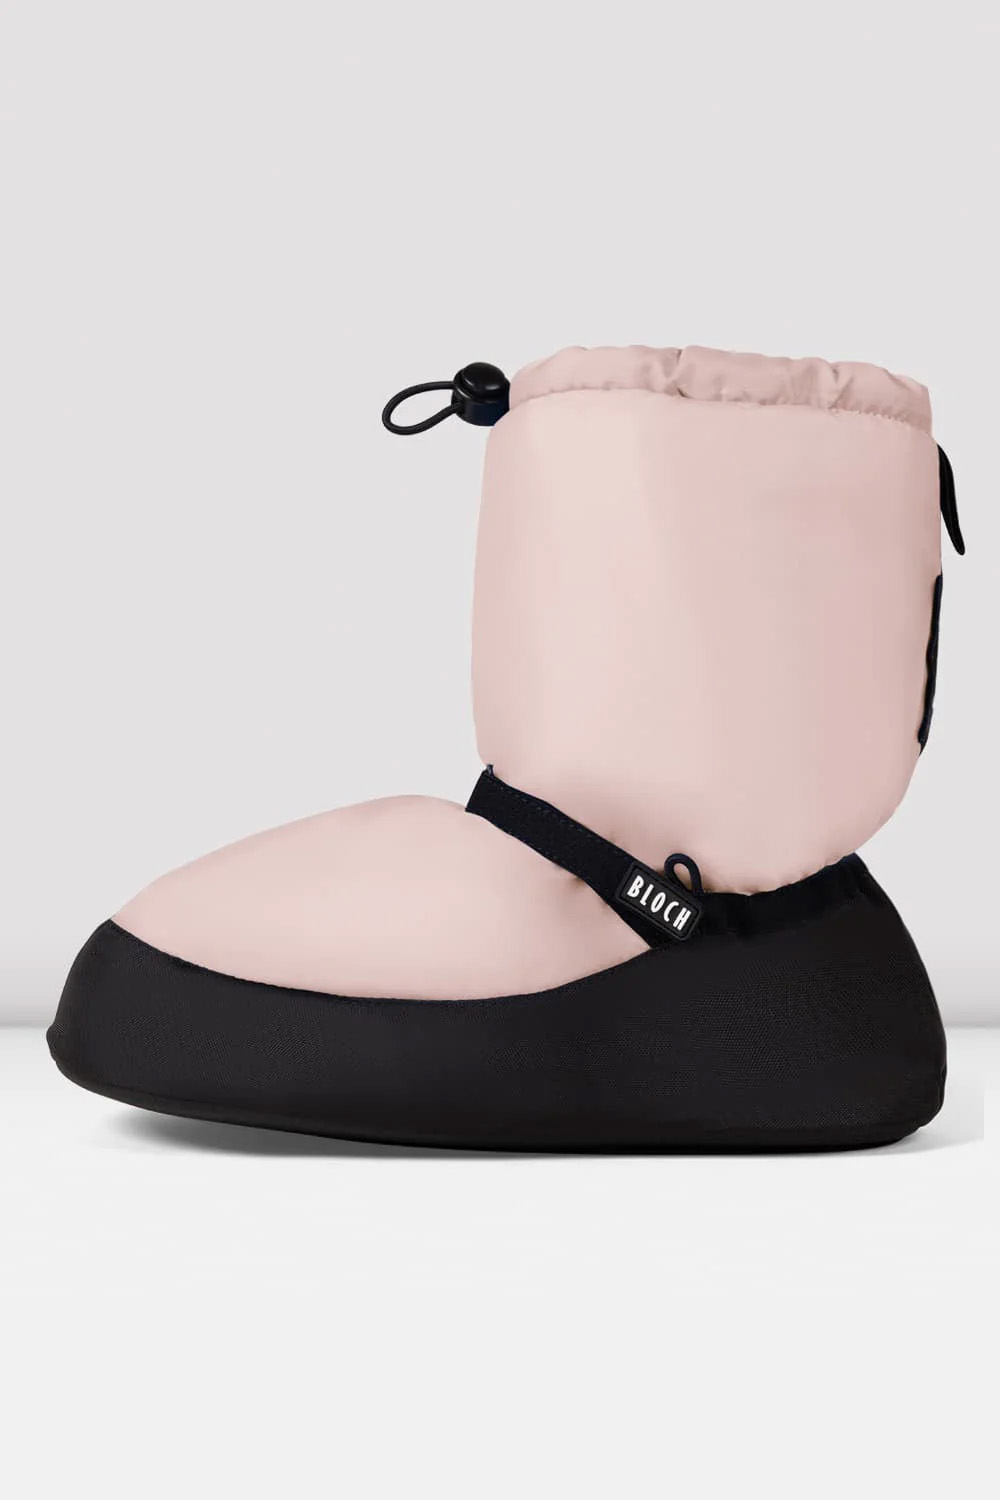 Warm Up booties BLOCH IM009KB KIDS CDP Candy Pink size S